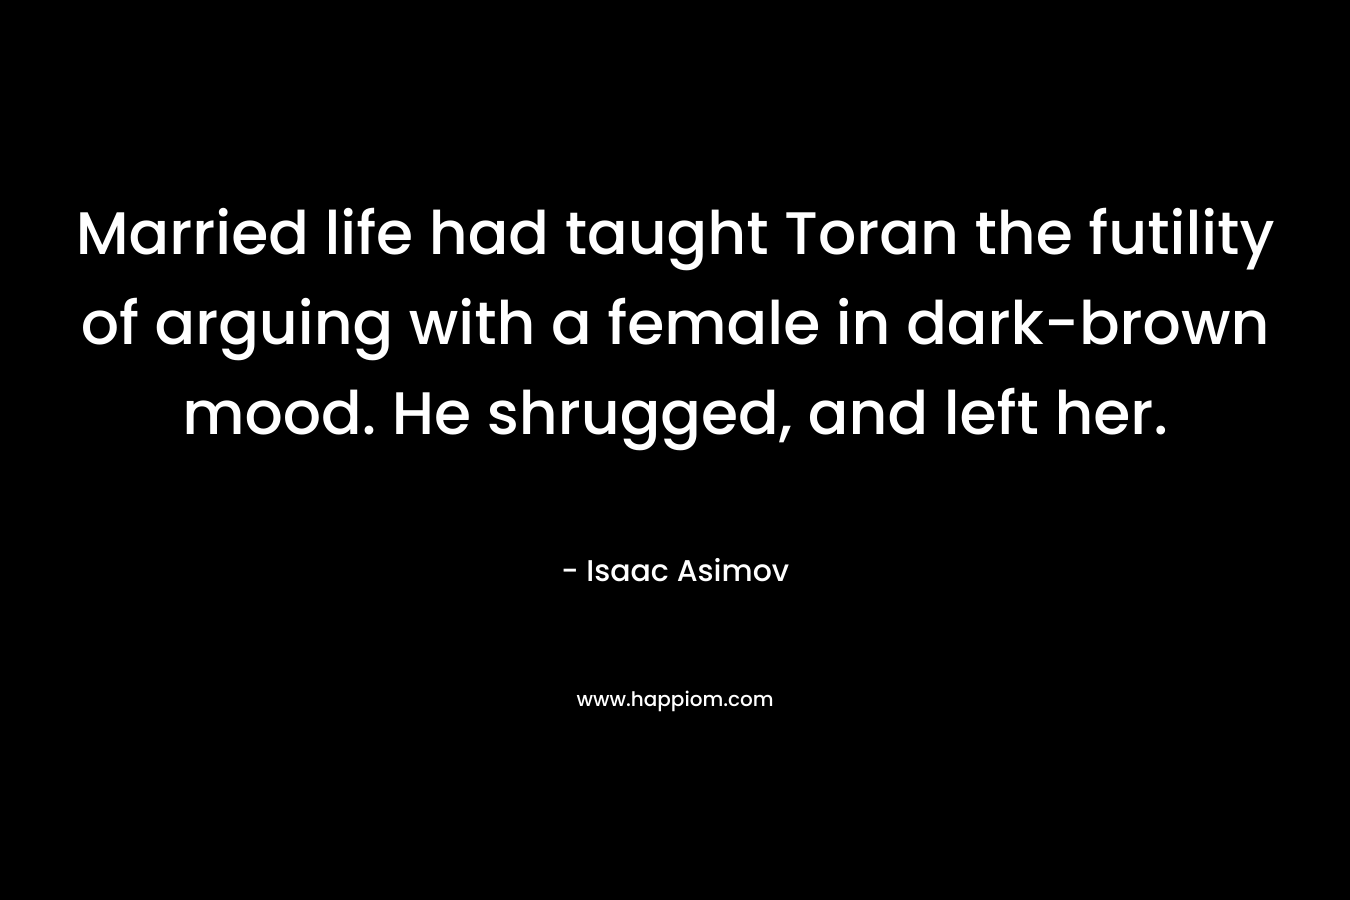 Married life had taught Toran the futility of arguing with a female in dark-brown mood. He shrugged, and left her. – Isaac Asimov